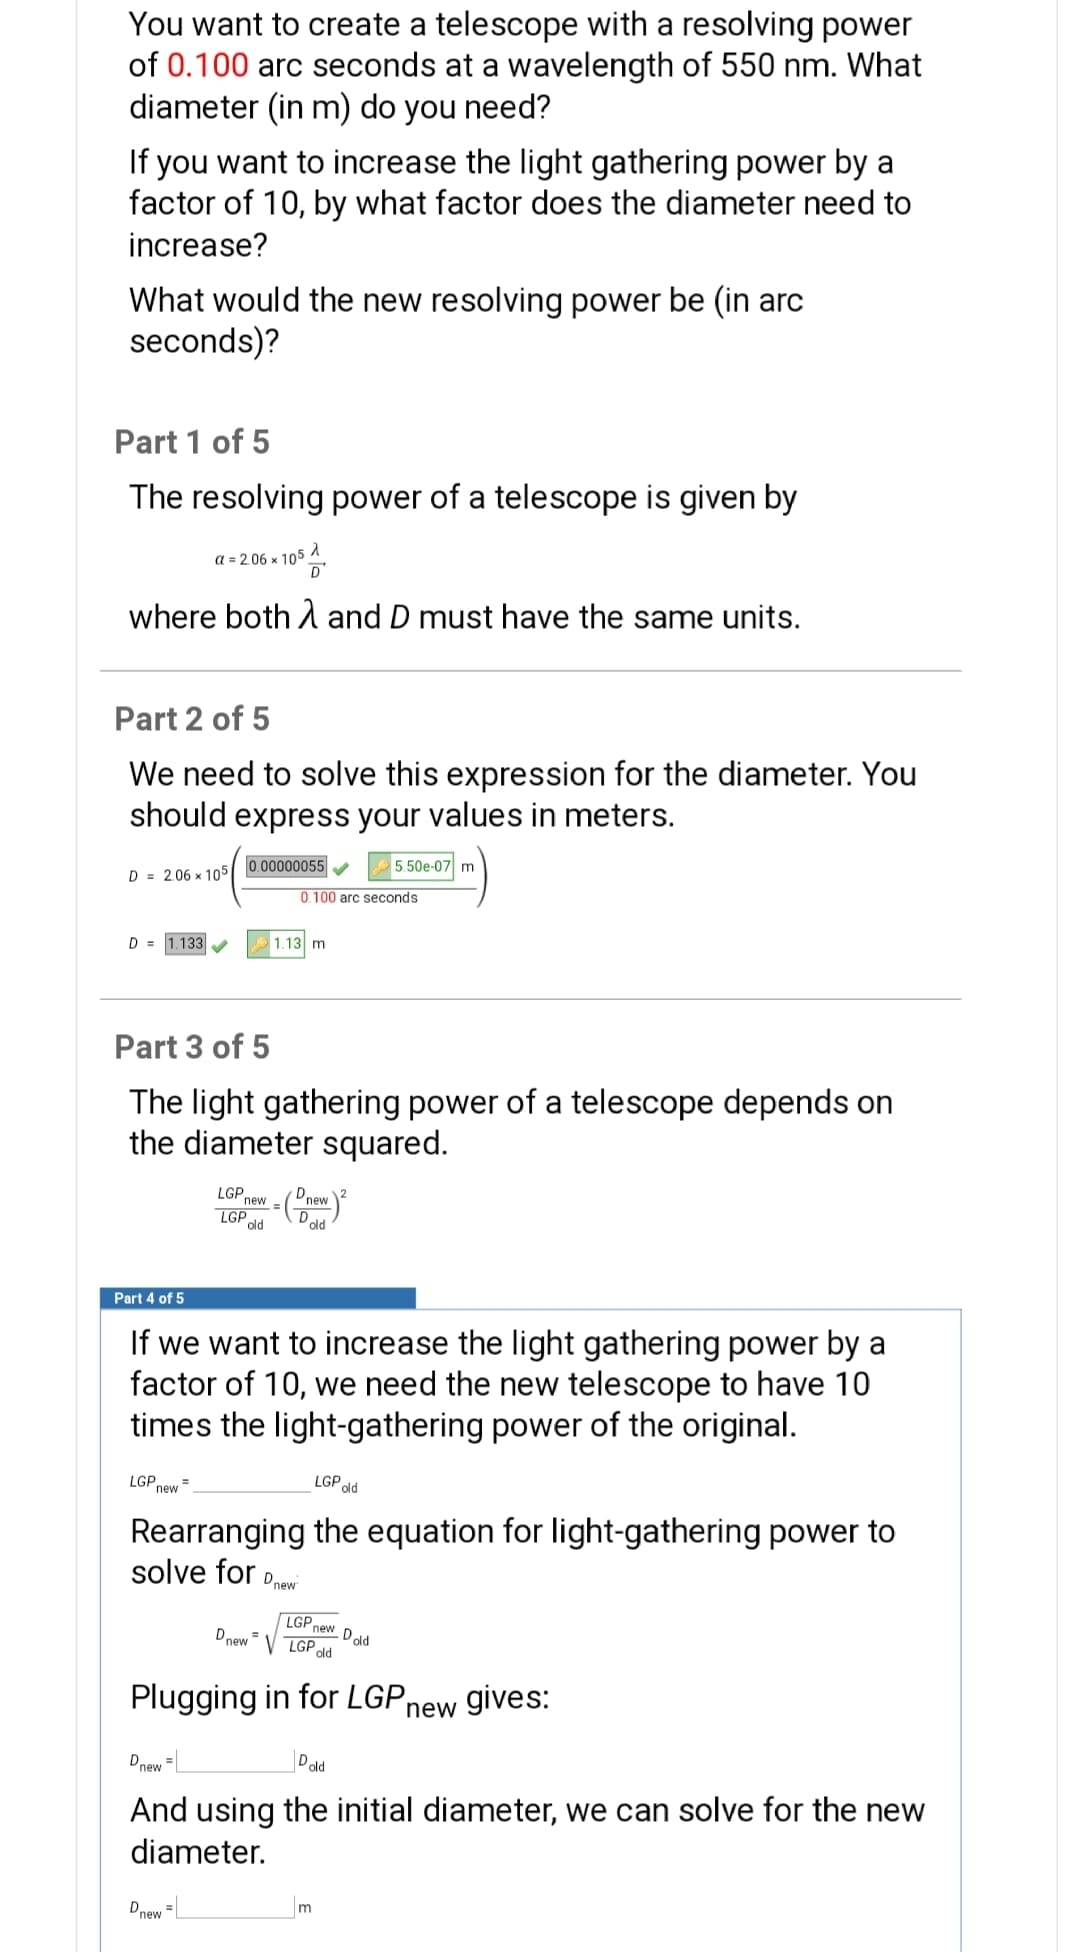 You want to create a telescope with a resolving power
of 0.100 arc seconds at a wavelength of 550 nm. What
diameter (in m) do you need?
If you want to increase the light gathering power by a
factor of 10, by what factor does the diameter need to
increase?
What would the new resolving power be (in arc
seconds)?
Part 1 of 5
The resolving power of a telescope is given by
a = 2.06 x 10°
where both A and D must have the same units.
Part 2 of 5
We need to solve this expression for the diameter. You
should express your values in meters.
0.00000055
5.50e-07 m
D = 2.06 x 105
0.100 arc seconds
D = 1.133
1.13 m
Part 3 of 5
The light gathering power of a telescope depends on
the diameter squared.
LGP
new
=(Onew
D
LGPld
old
Part 4 of 5
If we want to increase the light gathering power by a
factor of 10, we need the new telescope to have 10
times the light-gathering power of the original.
LGP new
LGP old
Rearranging the equation for light-gathering power to
solve for
Dnew
LGP new Dold
Dnew =
LGP
old
Plugging in for LGP,
new gives:
Dnew =
Dold
And using the initial diameter, we can solve for the new
diameter.
Dnew
